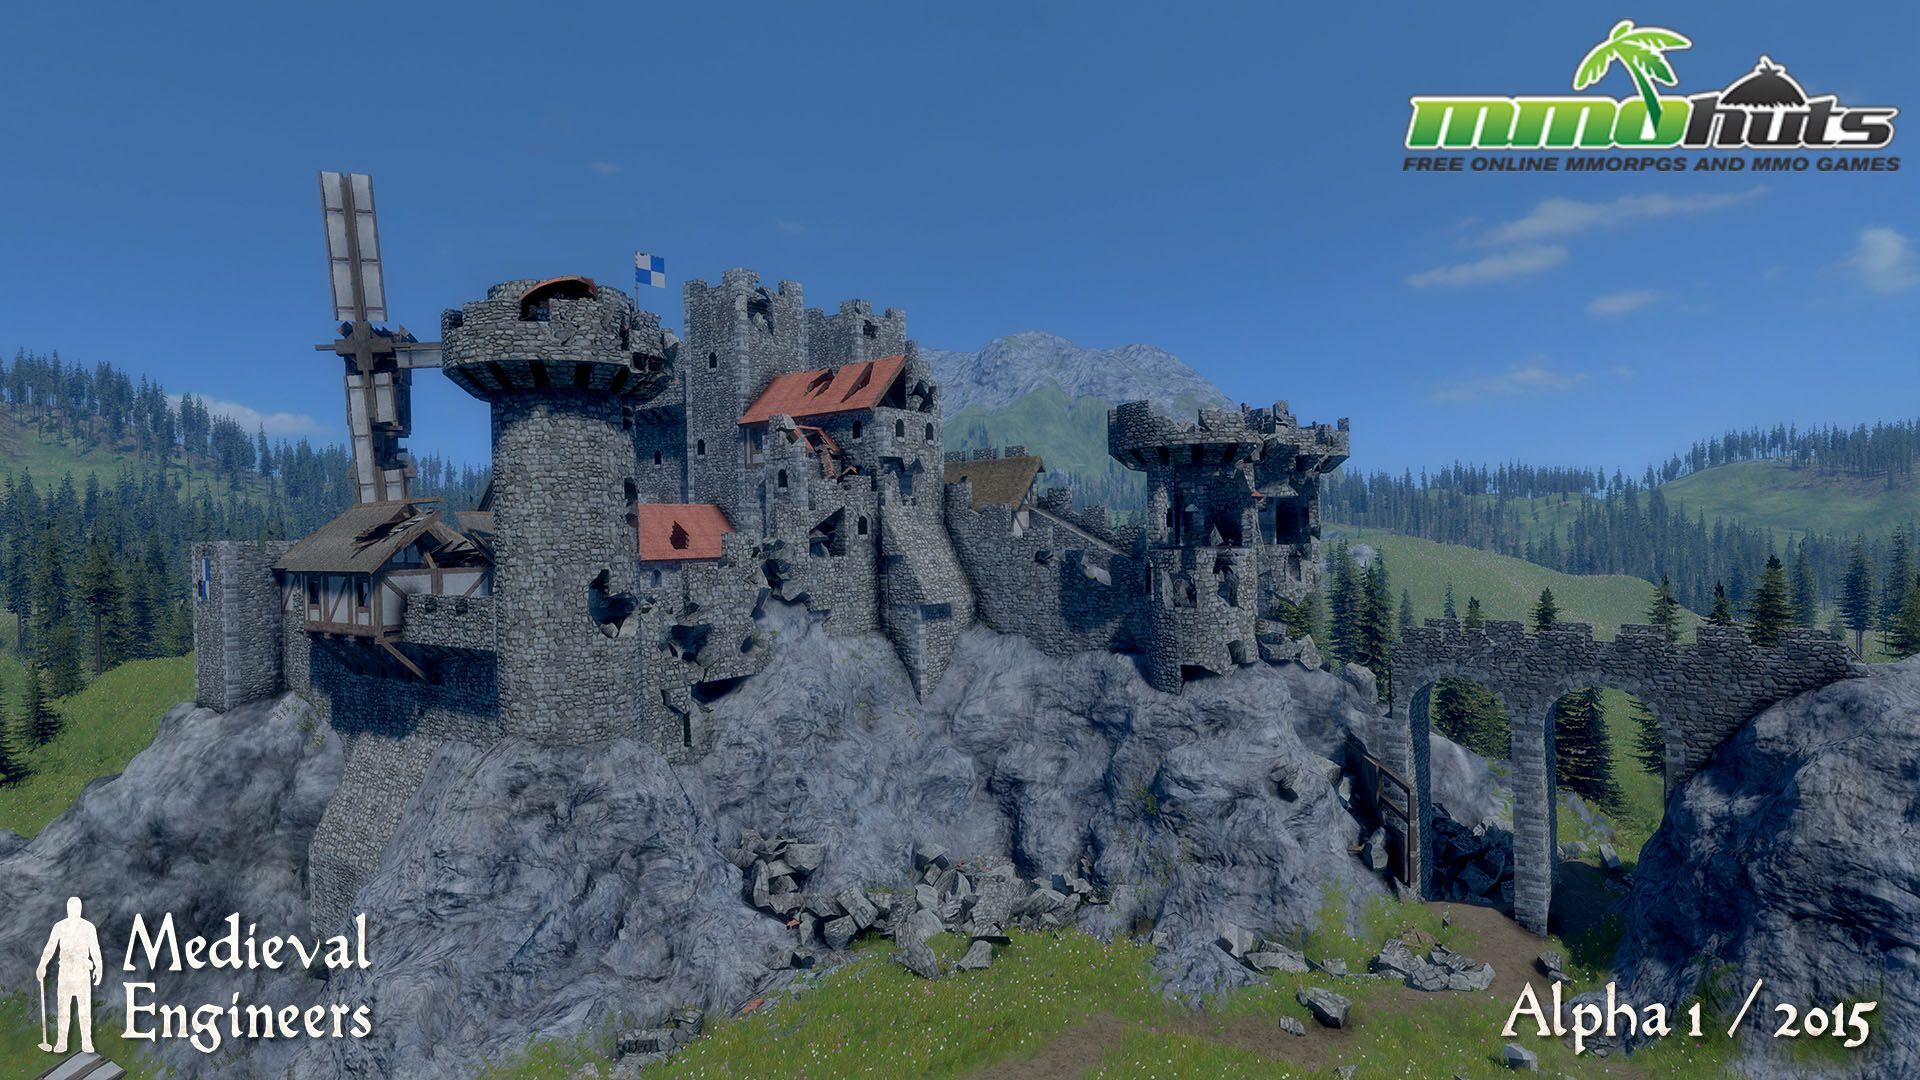 Medieval Engineers Castle Siege and Future Development Interview